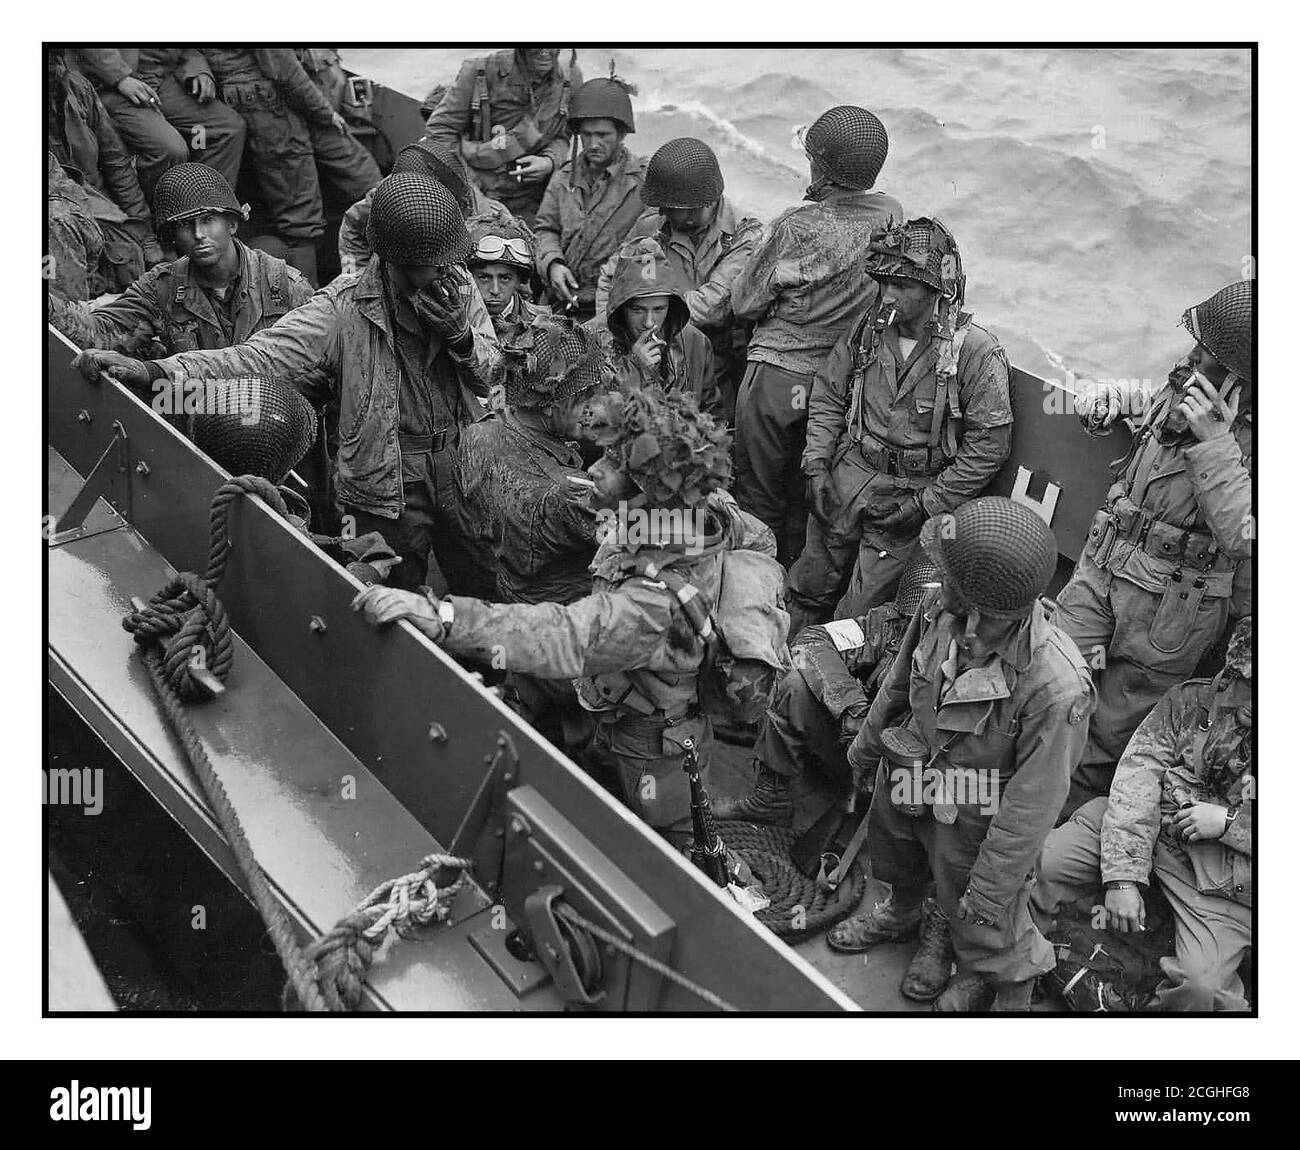 D-Day WW2 invasion glider pilots and support troops returning after successfully and courageously flying and landing troops behind enemy lines. Returning across the channel on troop landing craft 1944 Operation Overlord D-Day World War II Second World War Stock Photo